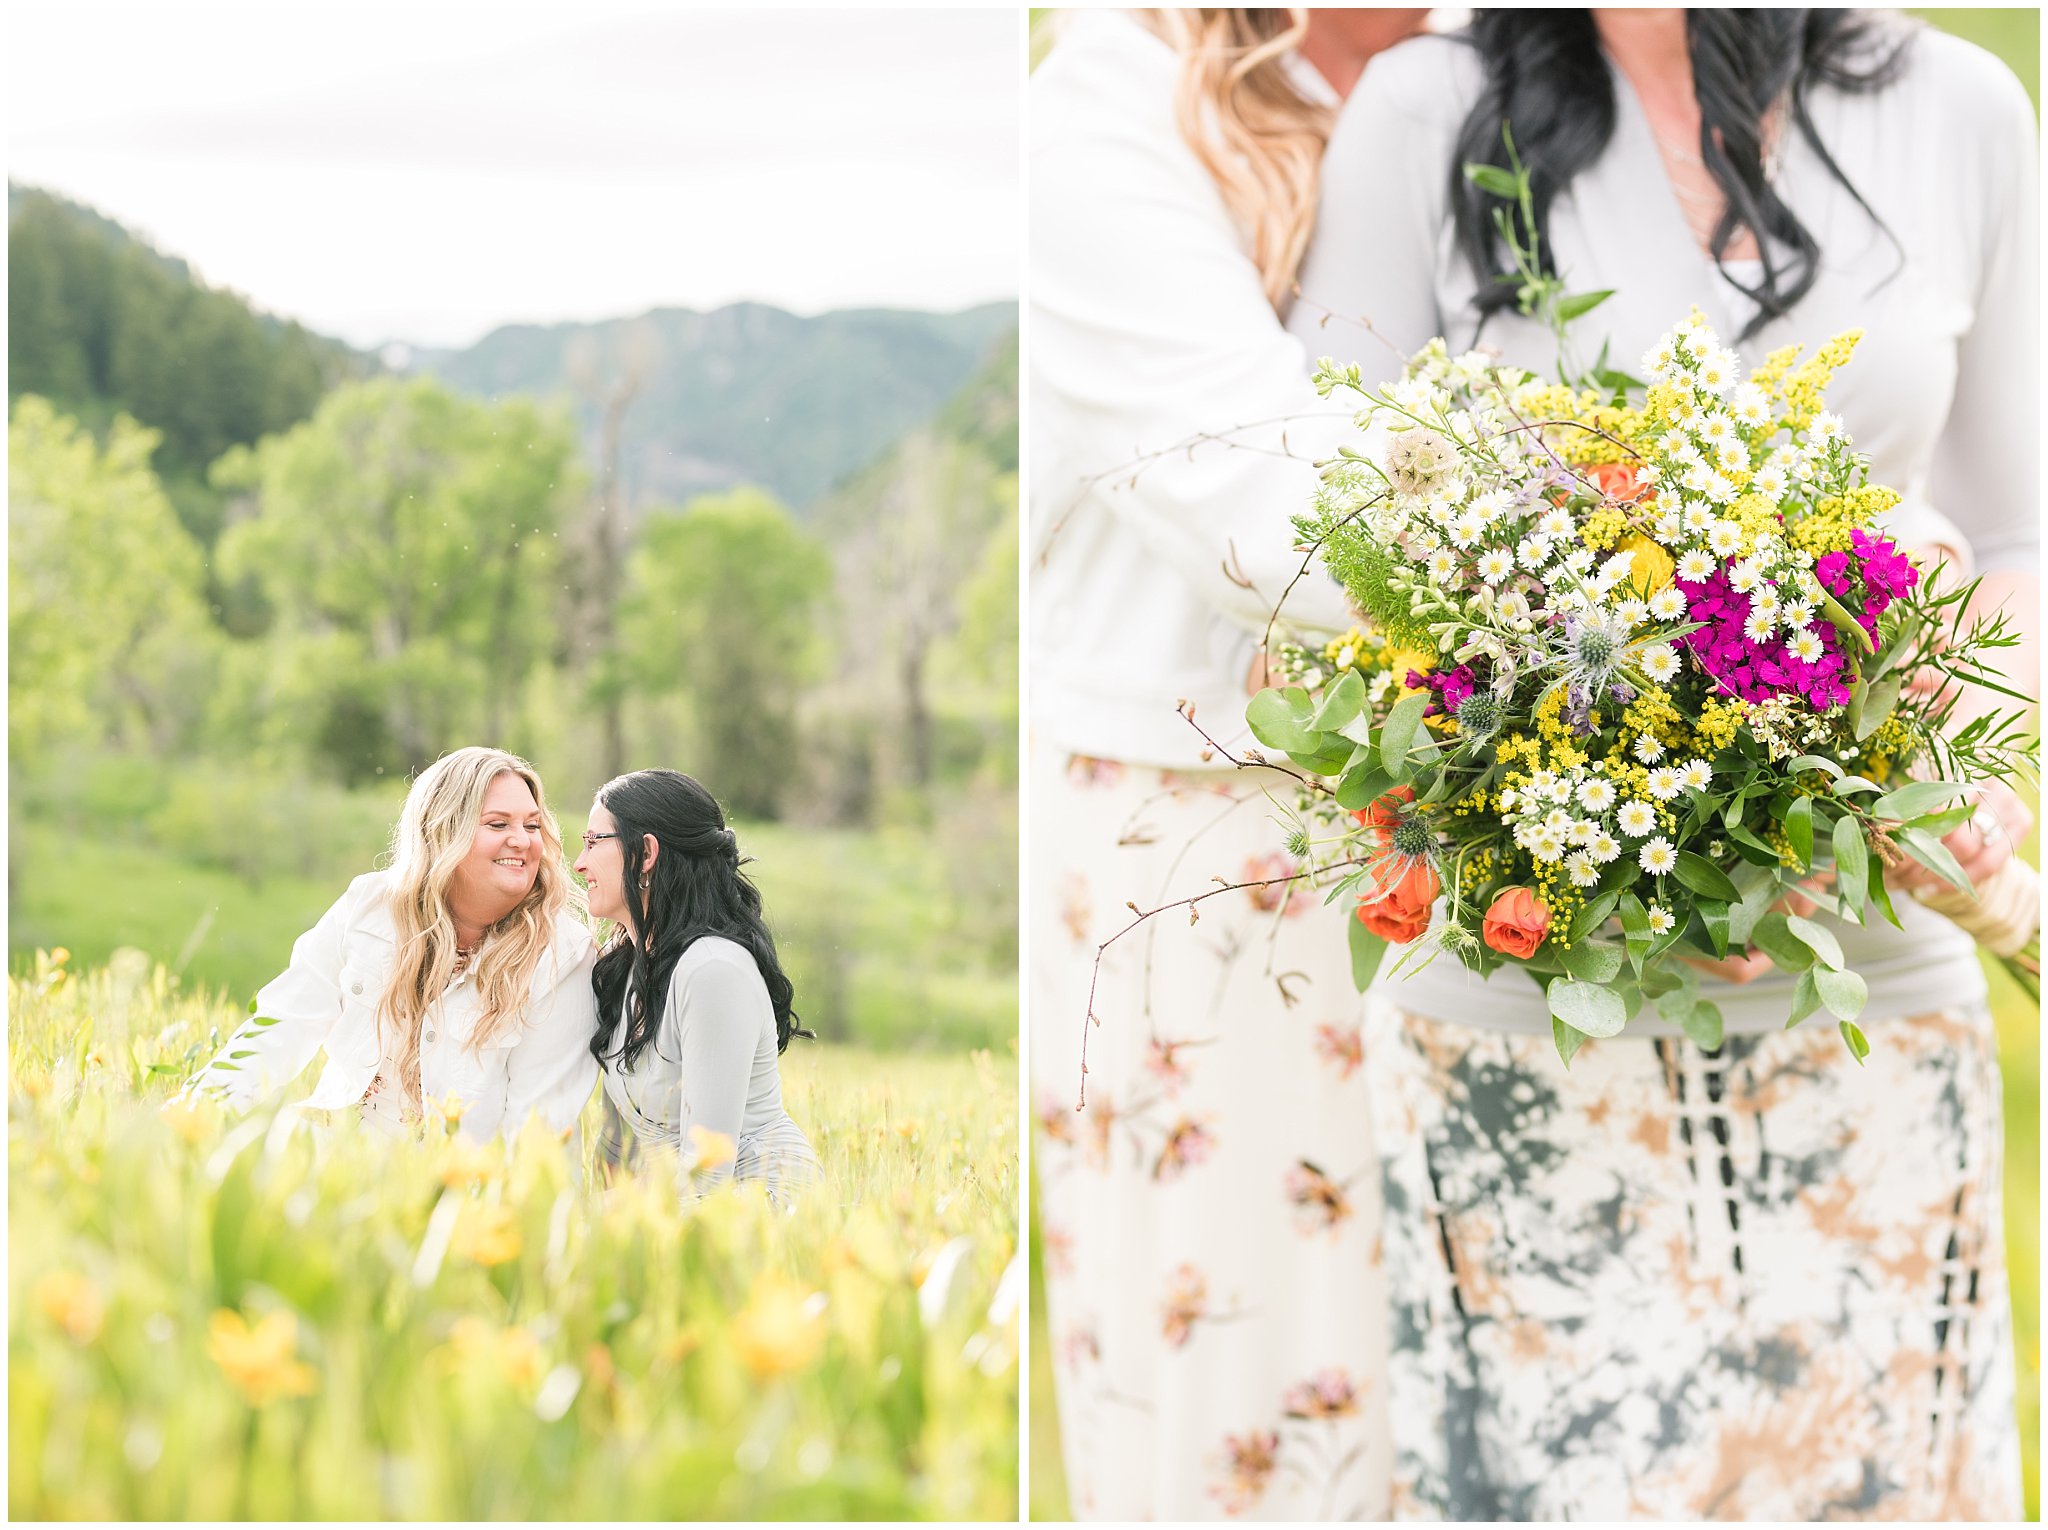 Couple in the mountains with bouquet and sunflowers | Summer Mountain Engagement | Jessie and Dallin Photography